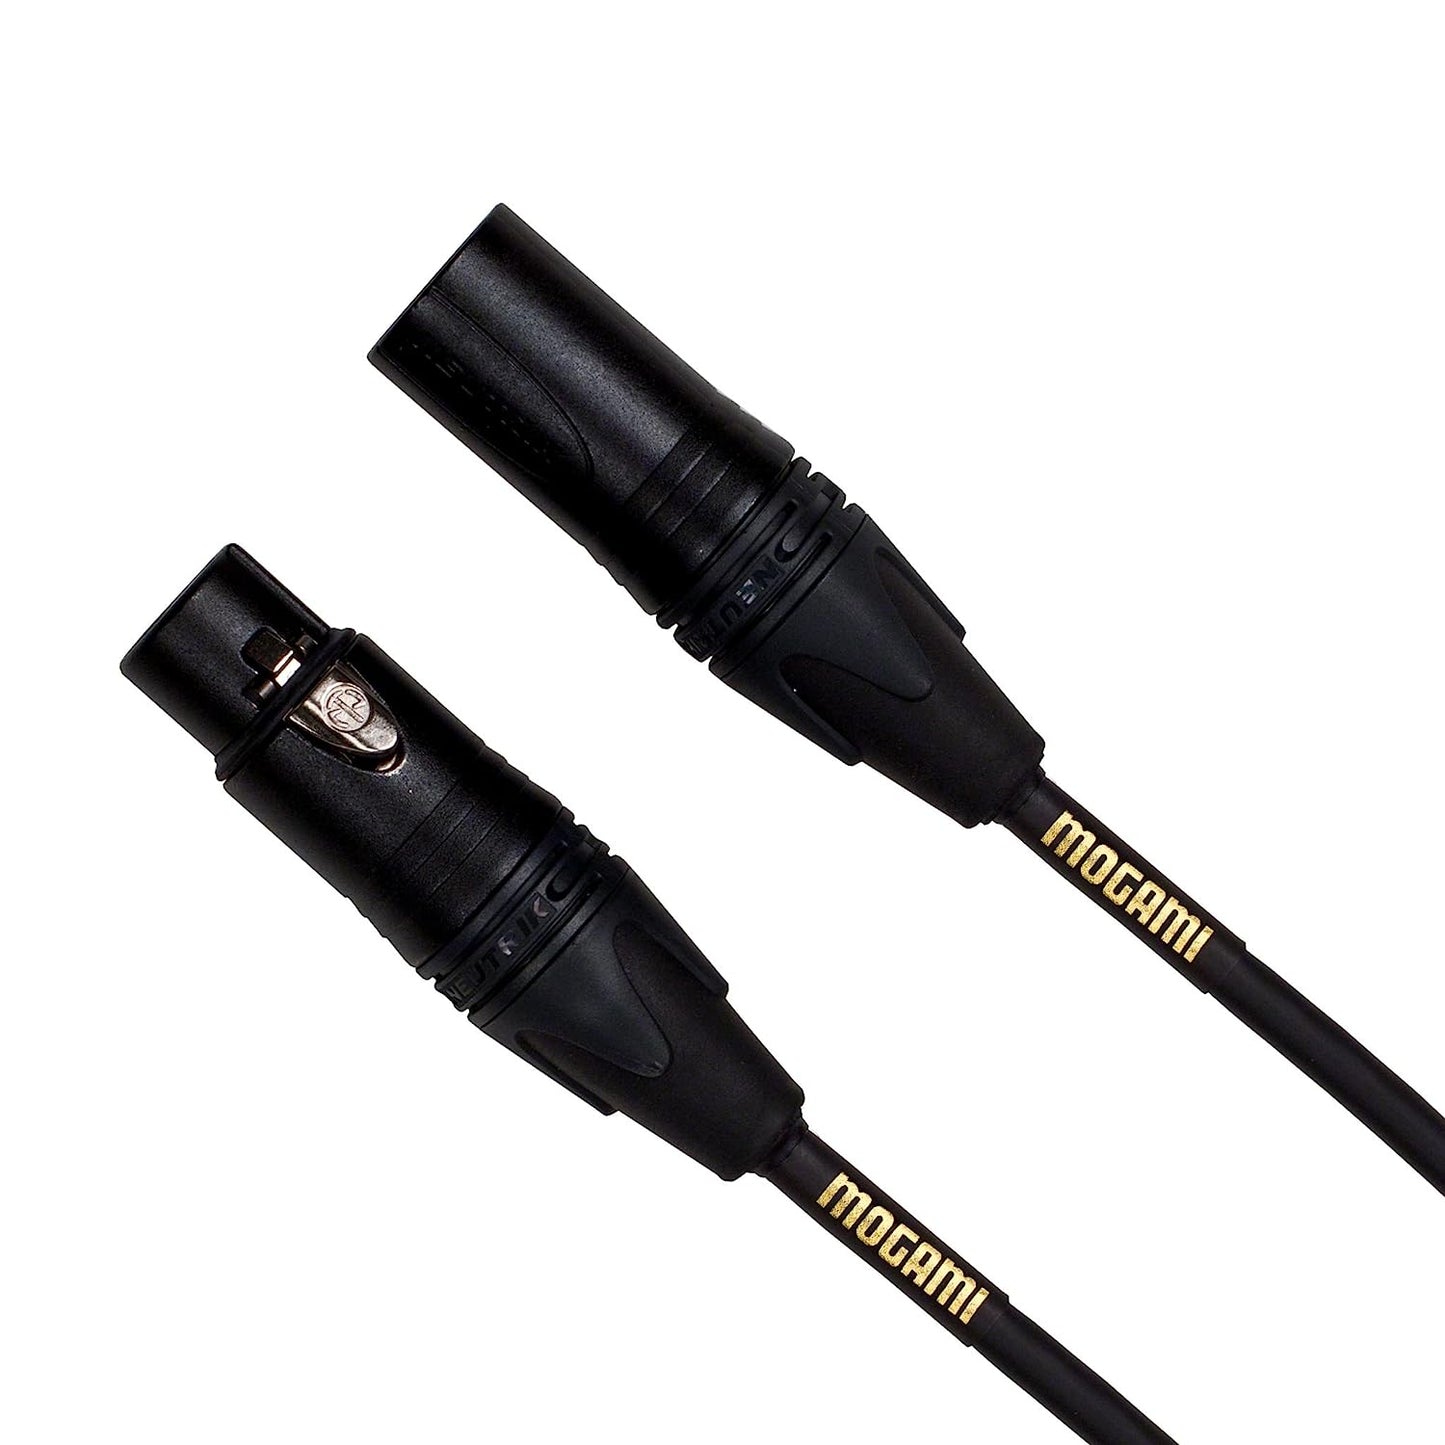 Mogami Gold STUDIO-15 XLR Microphone Cable, 15 Foot